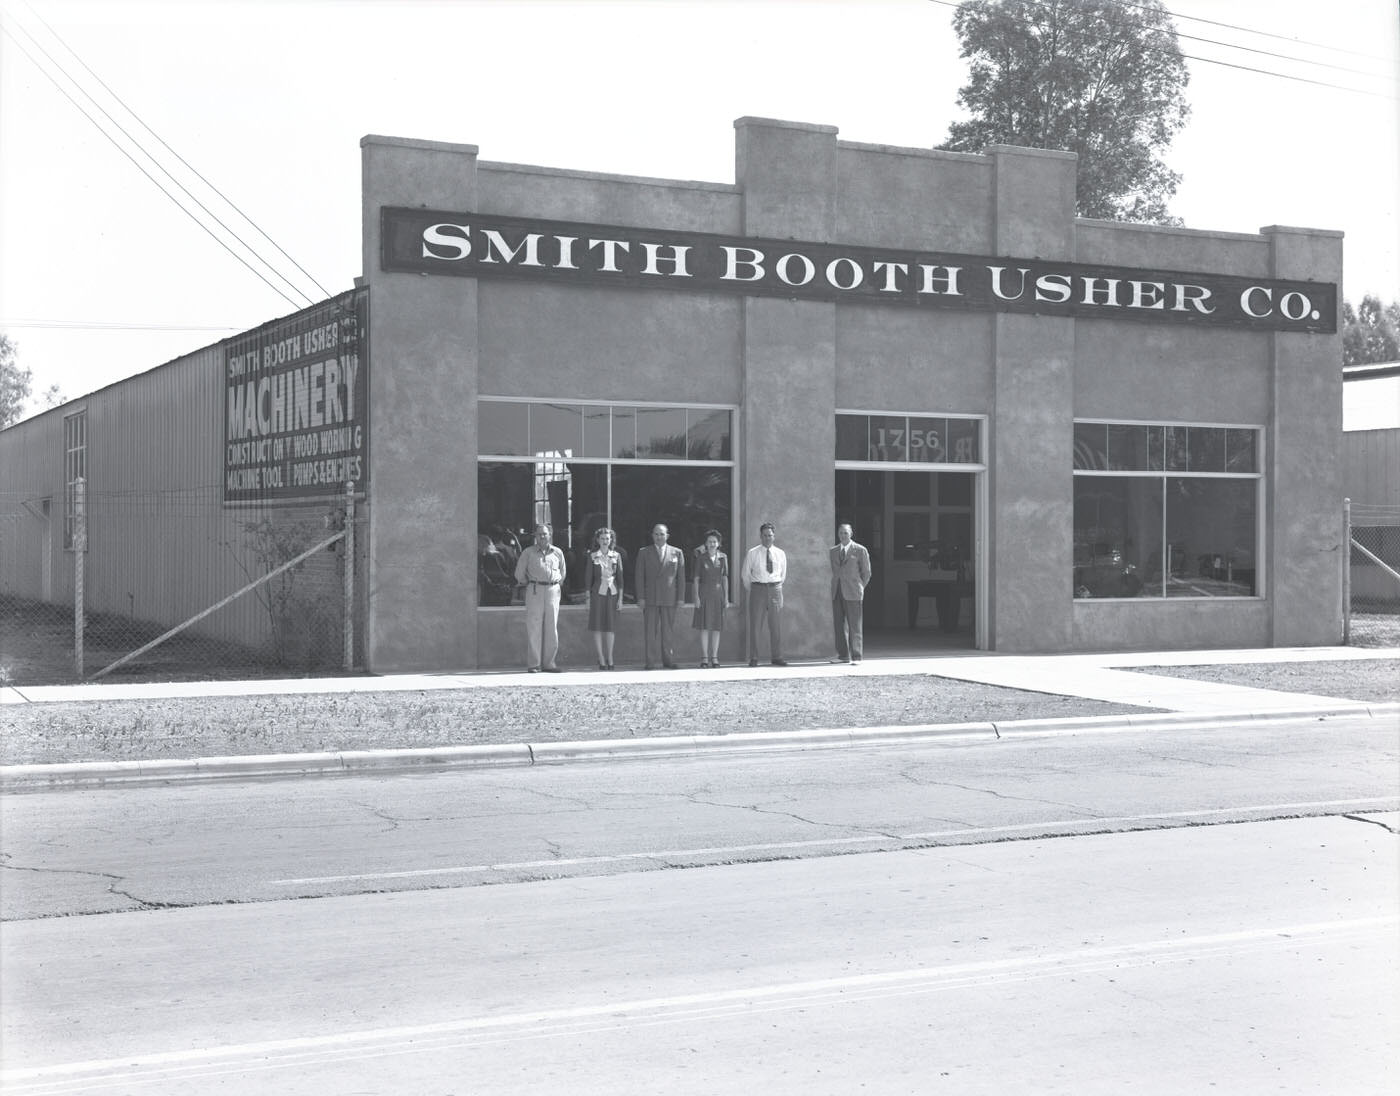 Smith Booth Usher Co. Employees in Front of Building, 1944